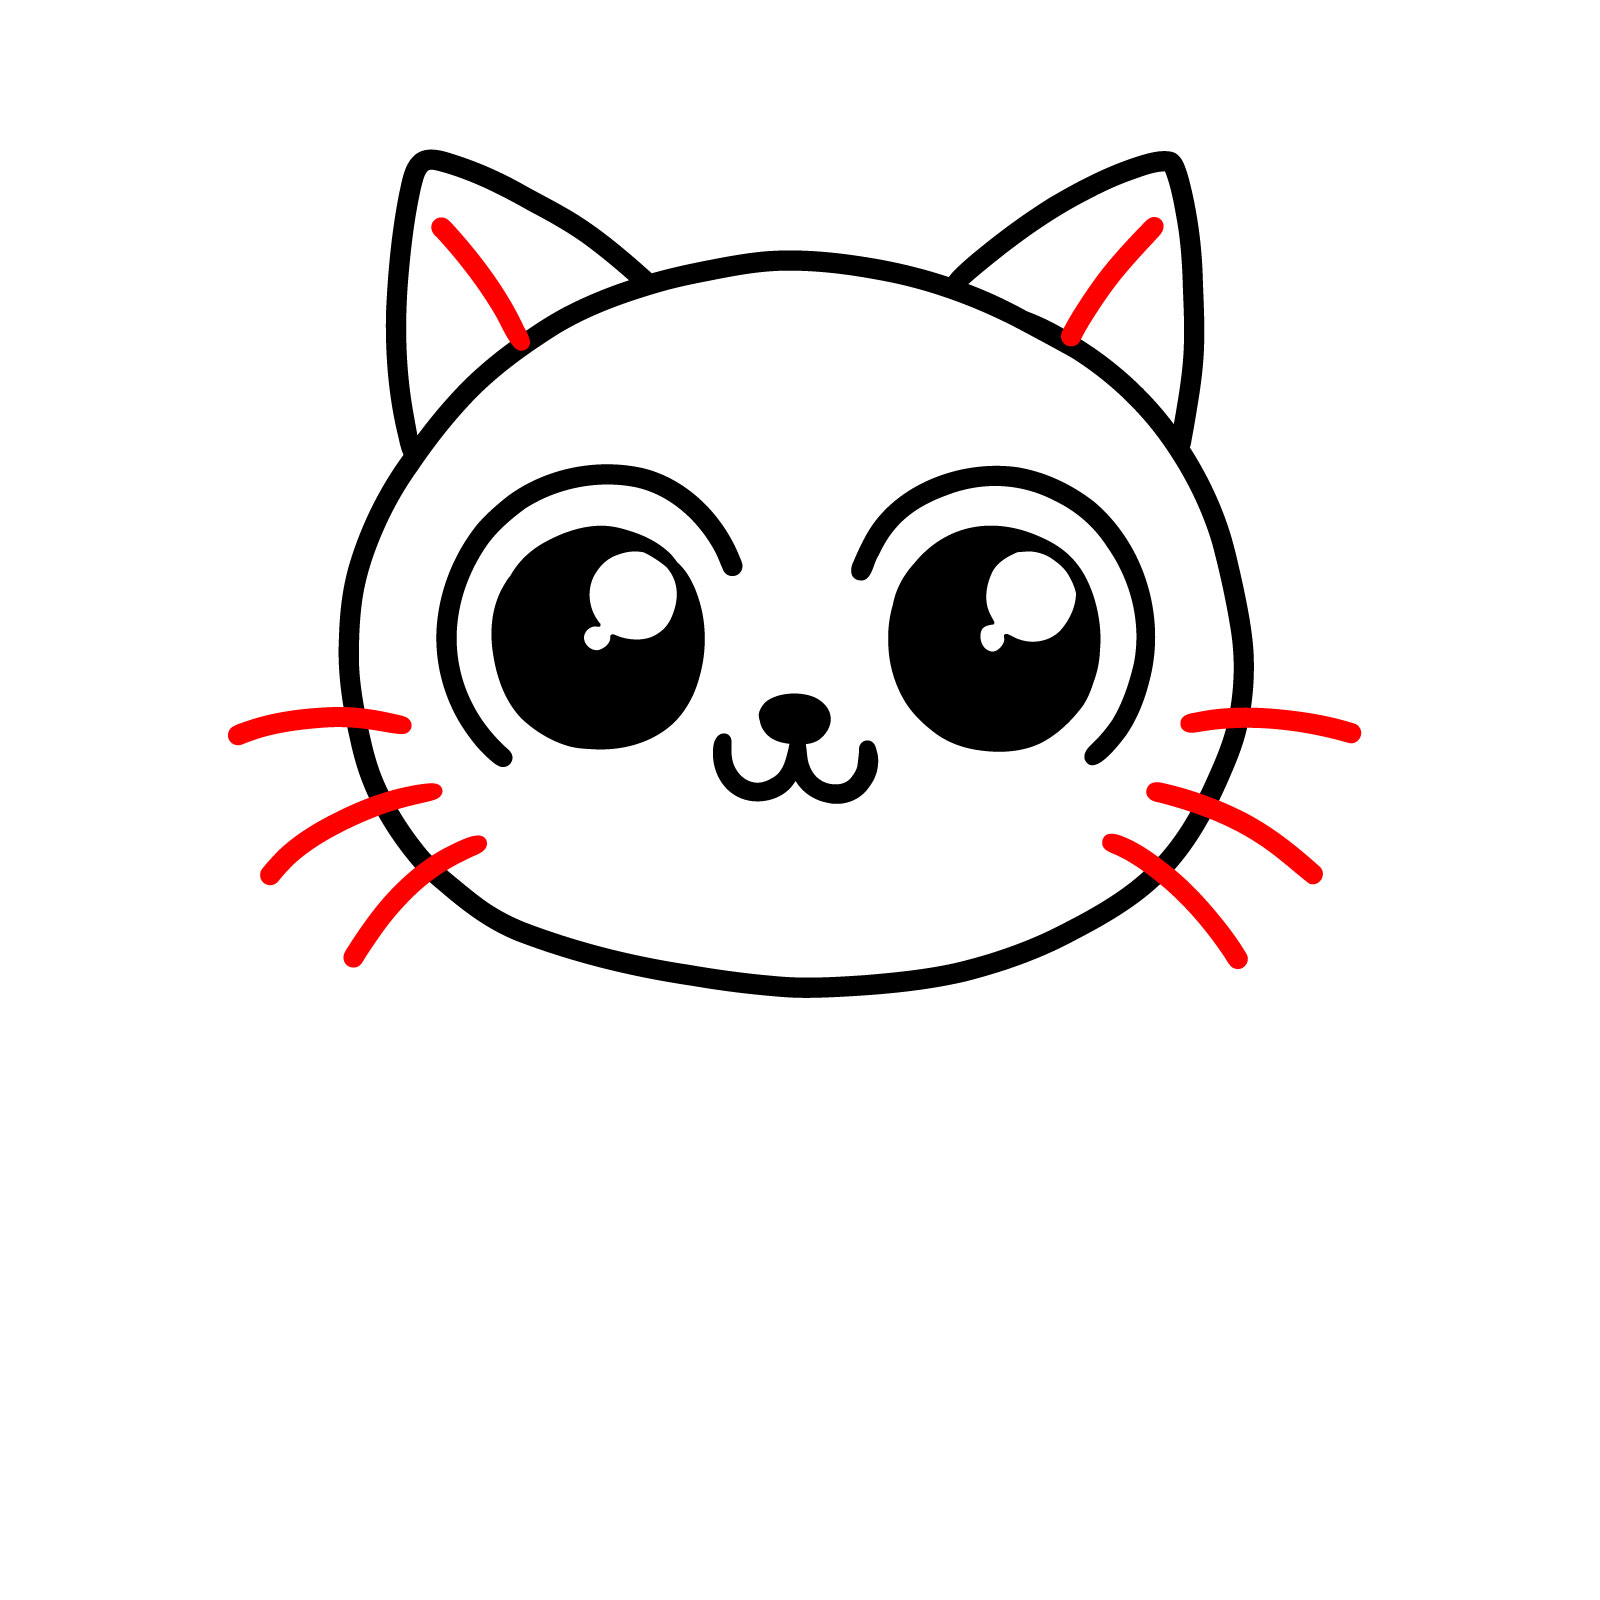 Cartoon cat face drawing with whiskers and fur details - step 05